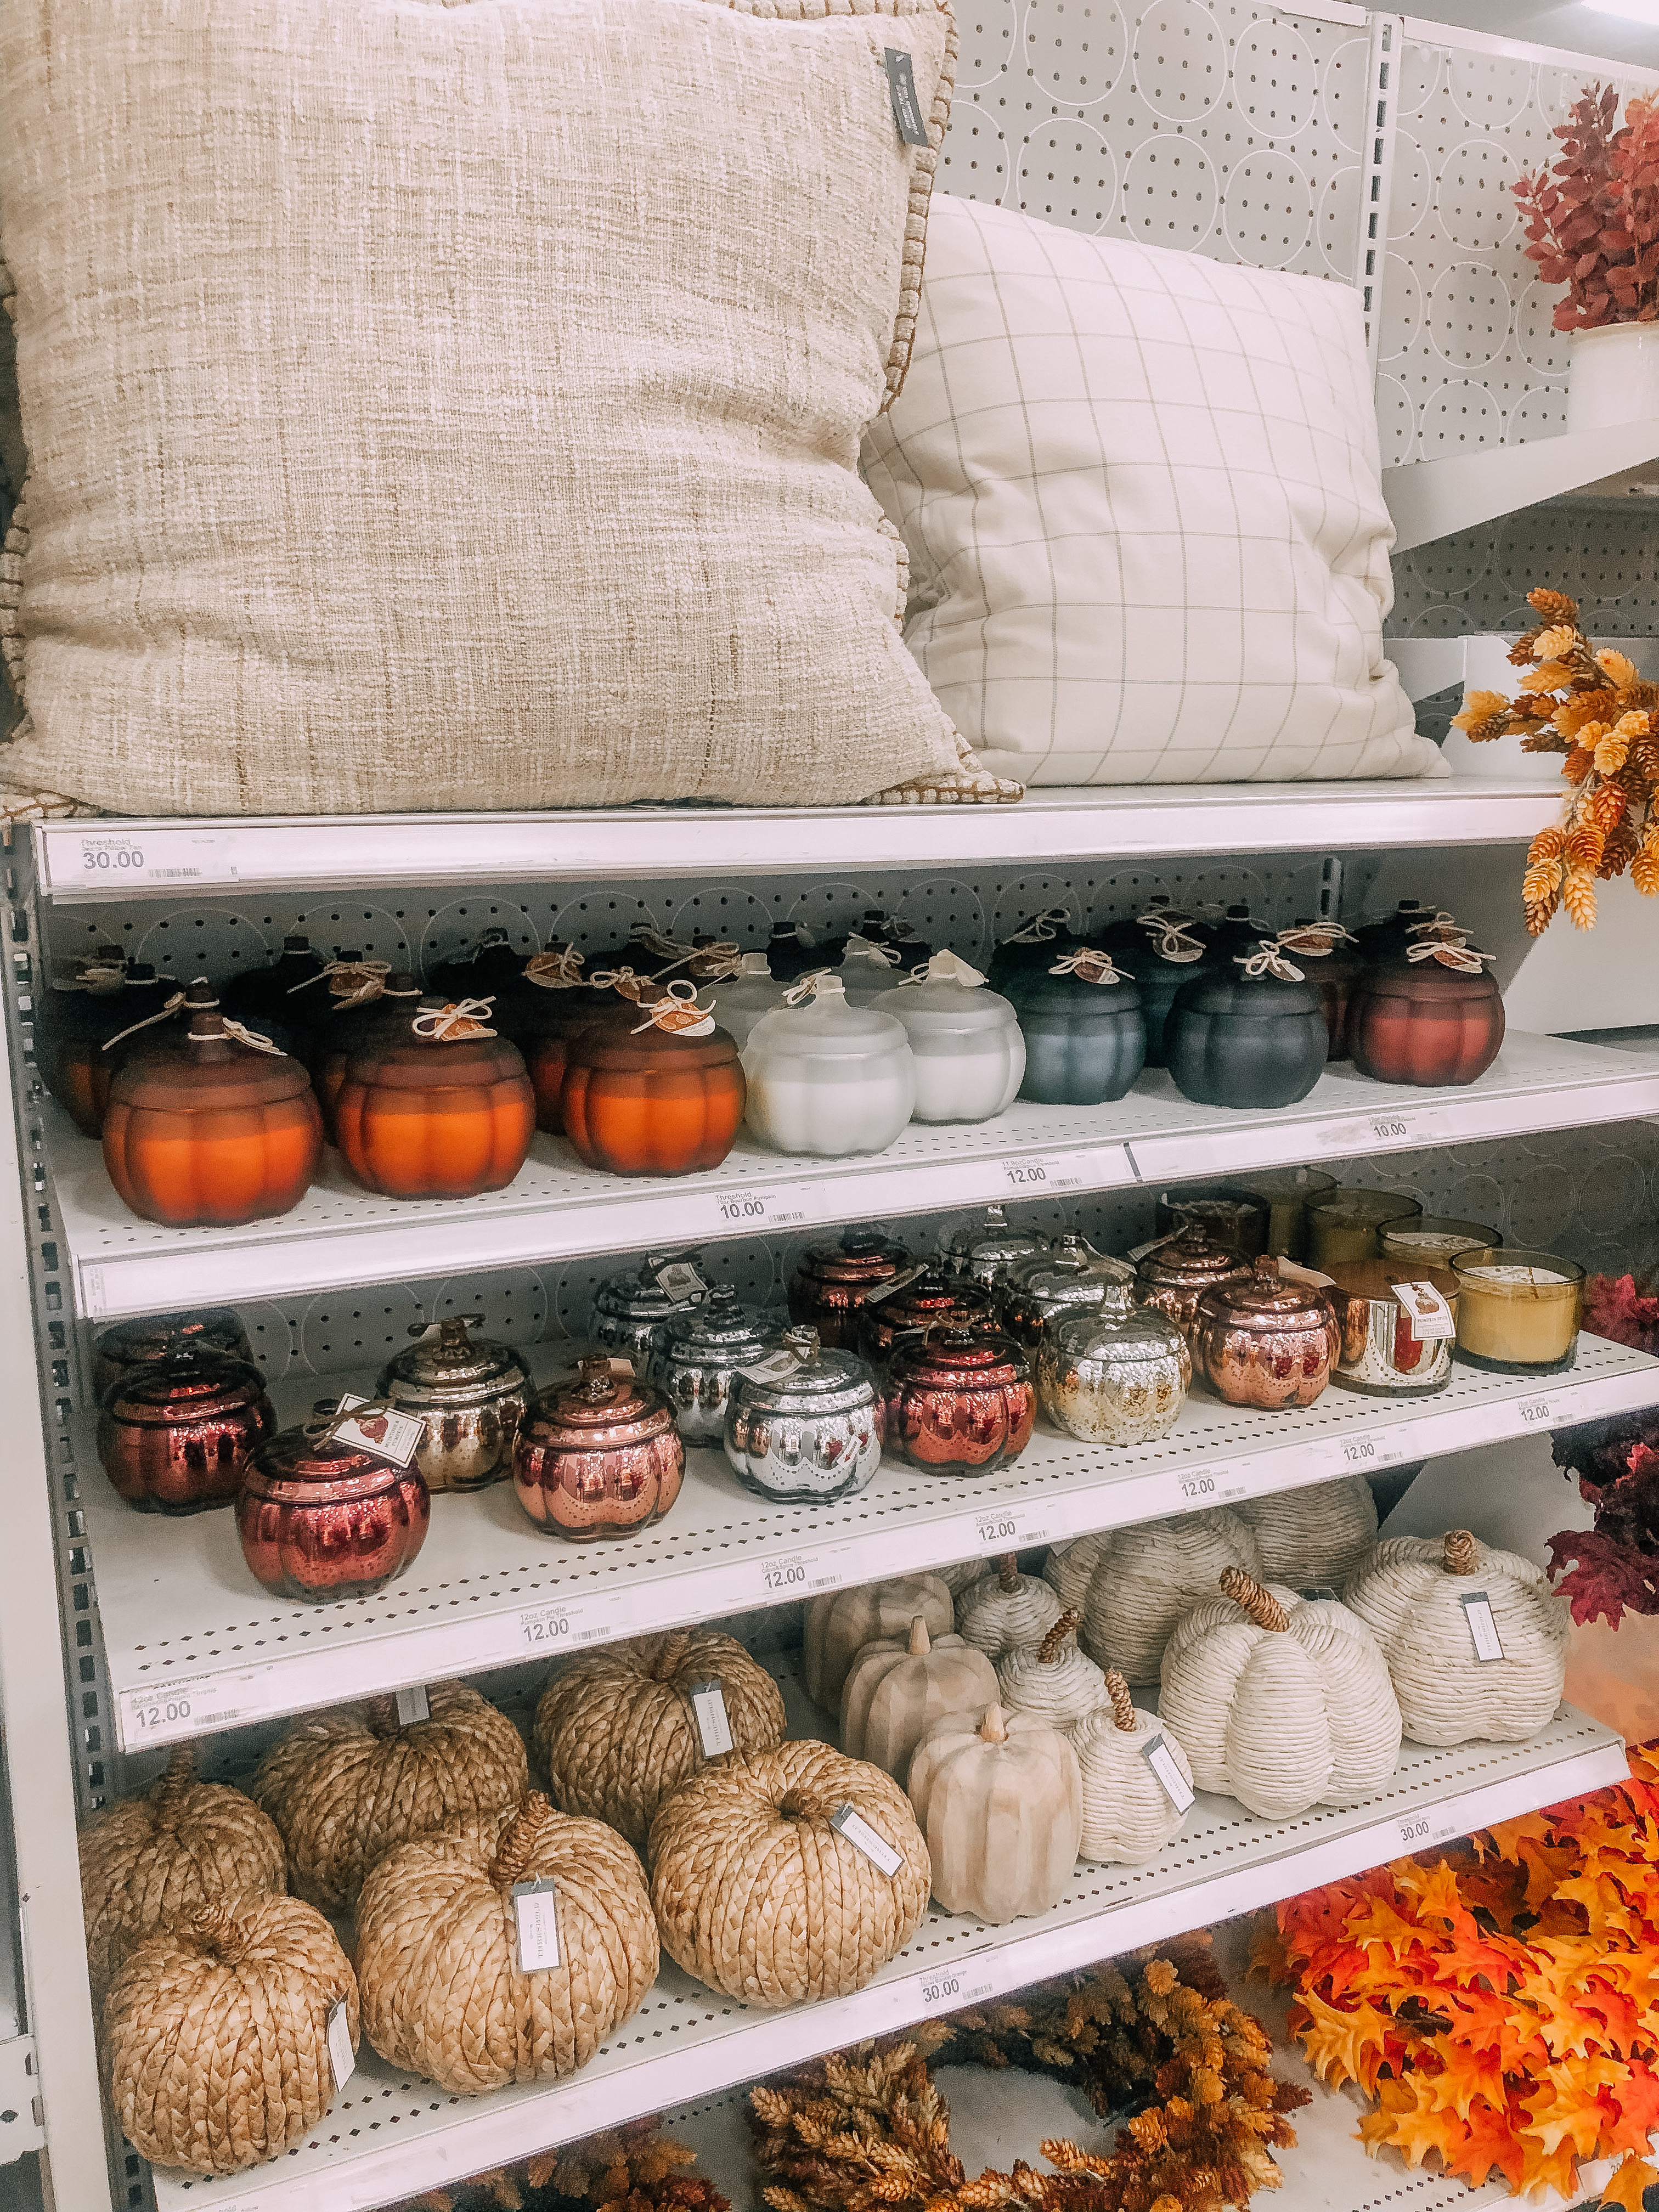 Fall home decor, throw pillows, decorative pumpkins, and fall scented candles.